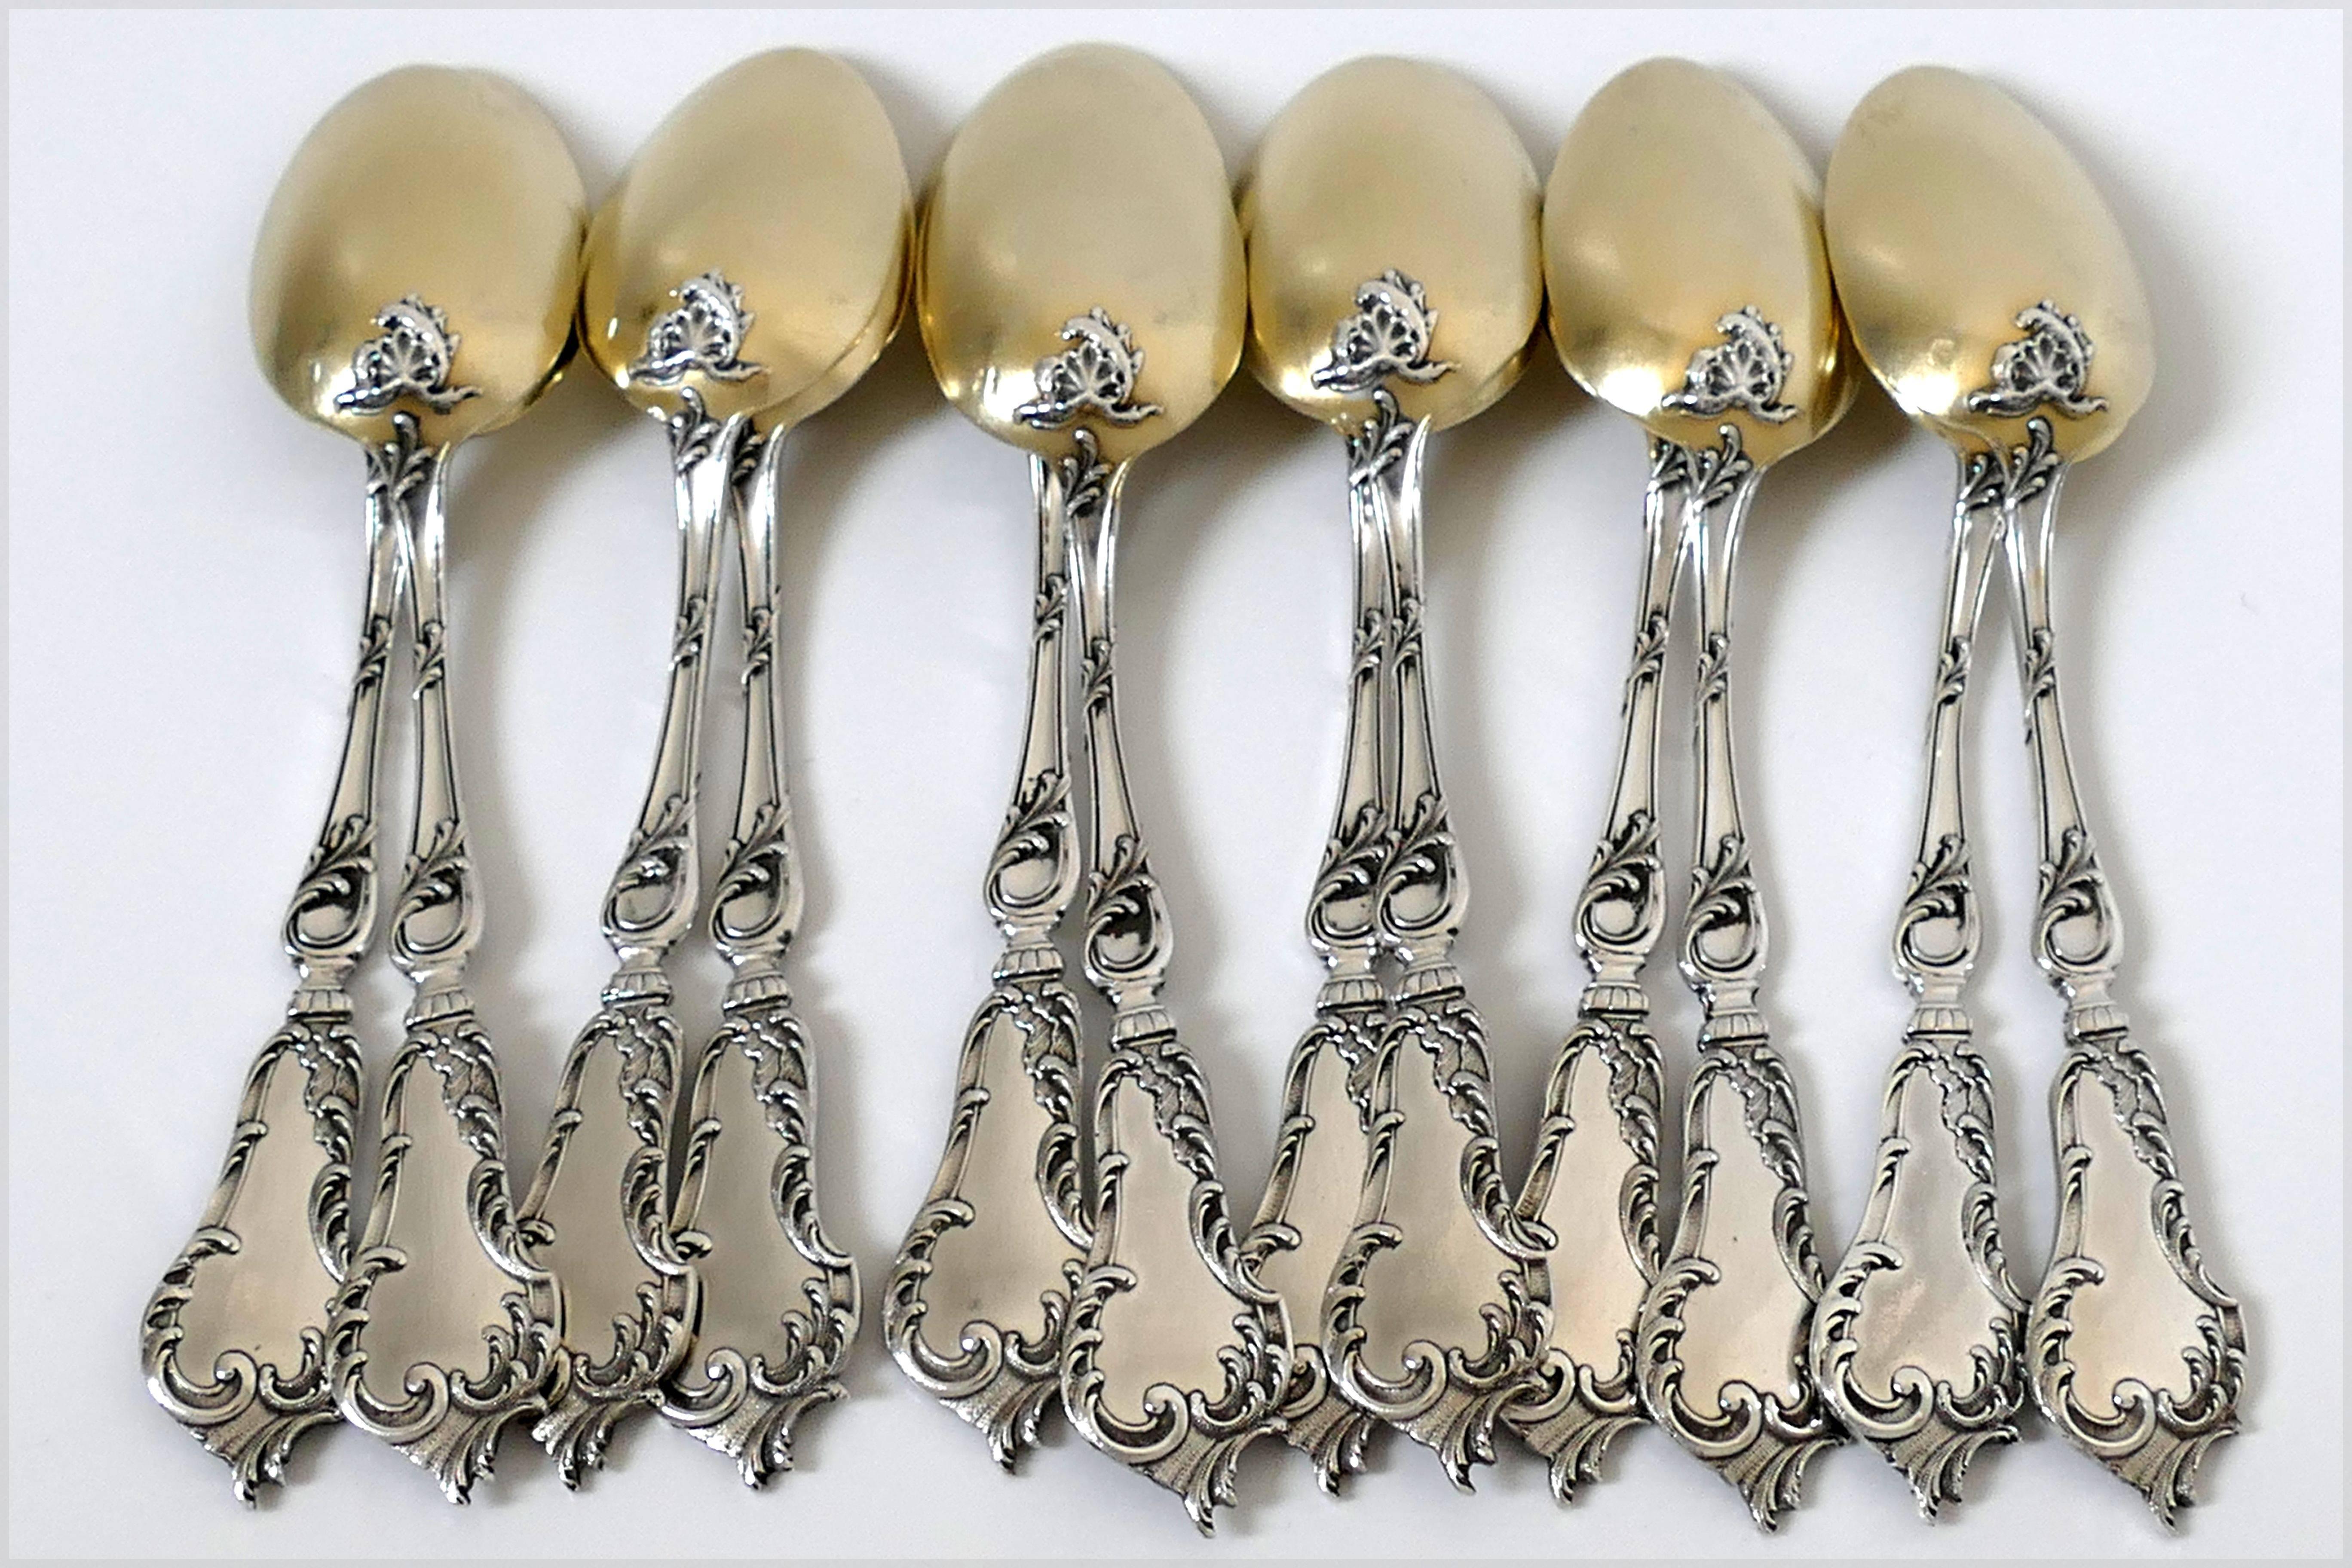 Soufflot Fabulous French All Sterling Silver 18-Karat Gold Tea Coffee Spoons Set For Sale 3